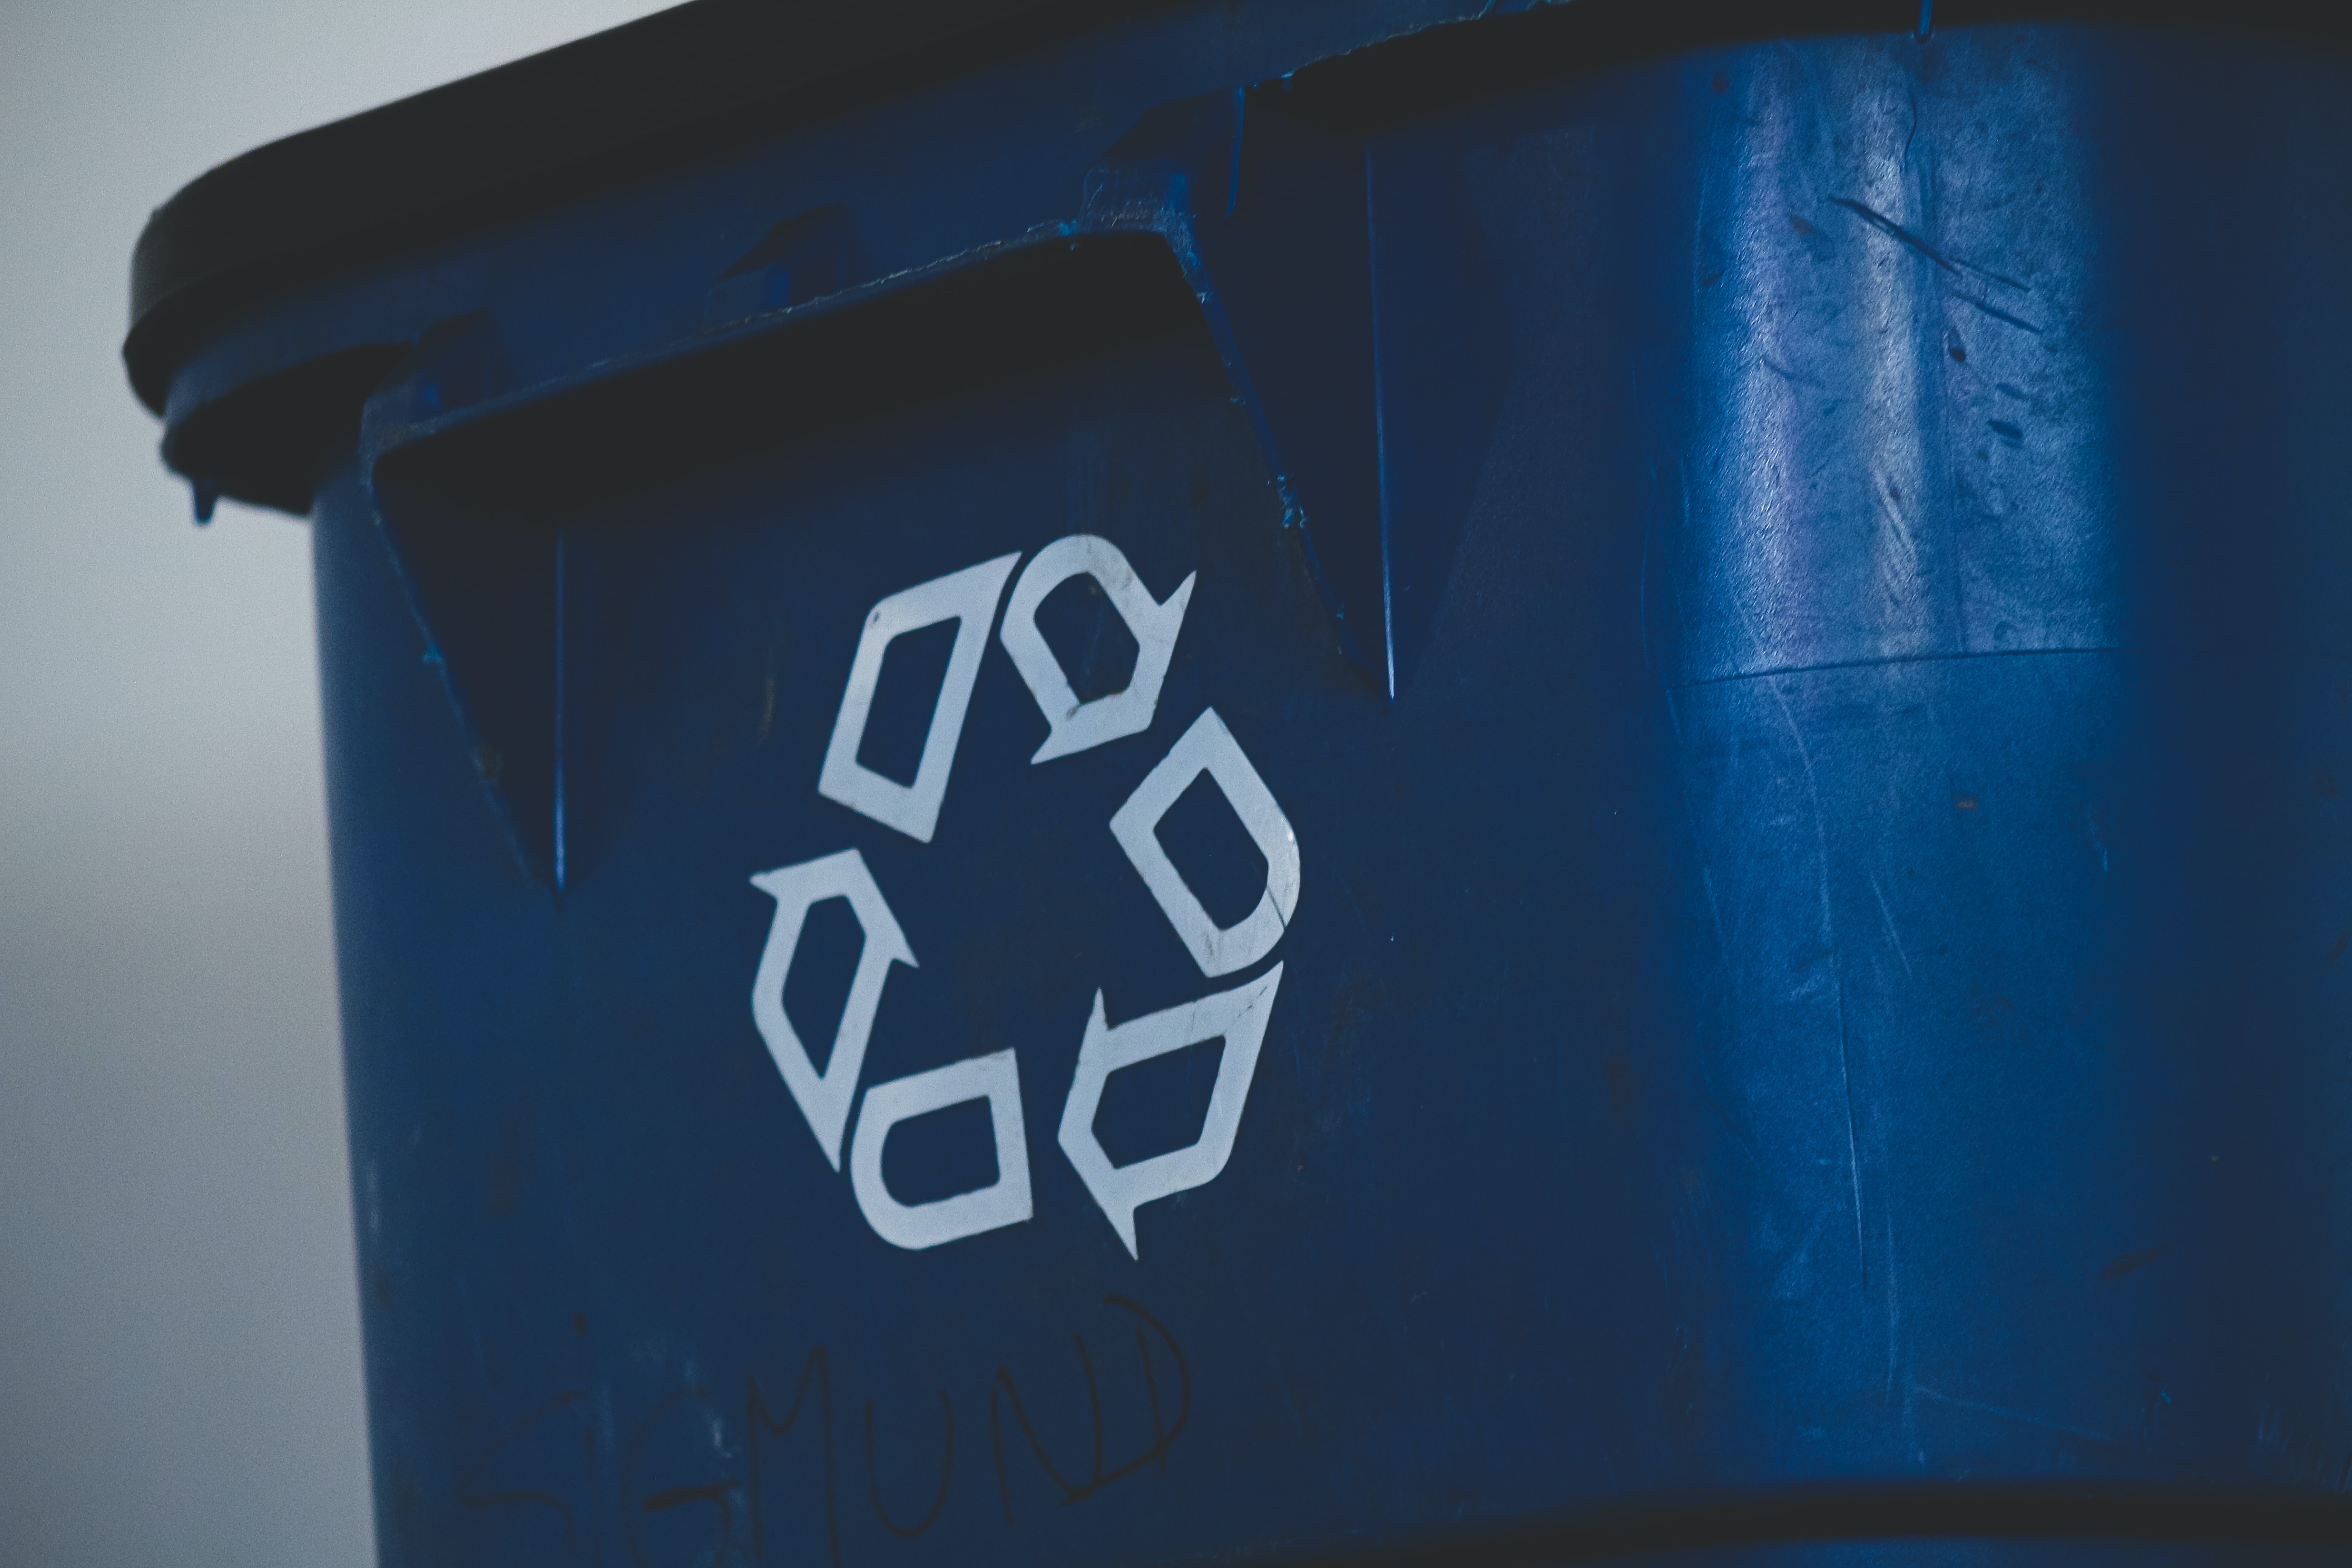 A blue recycling bin with the chasing arrows recycling symbol